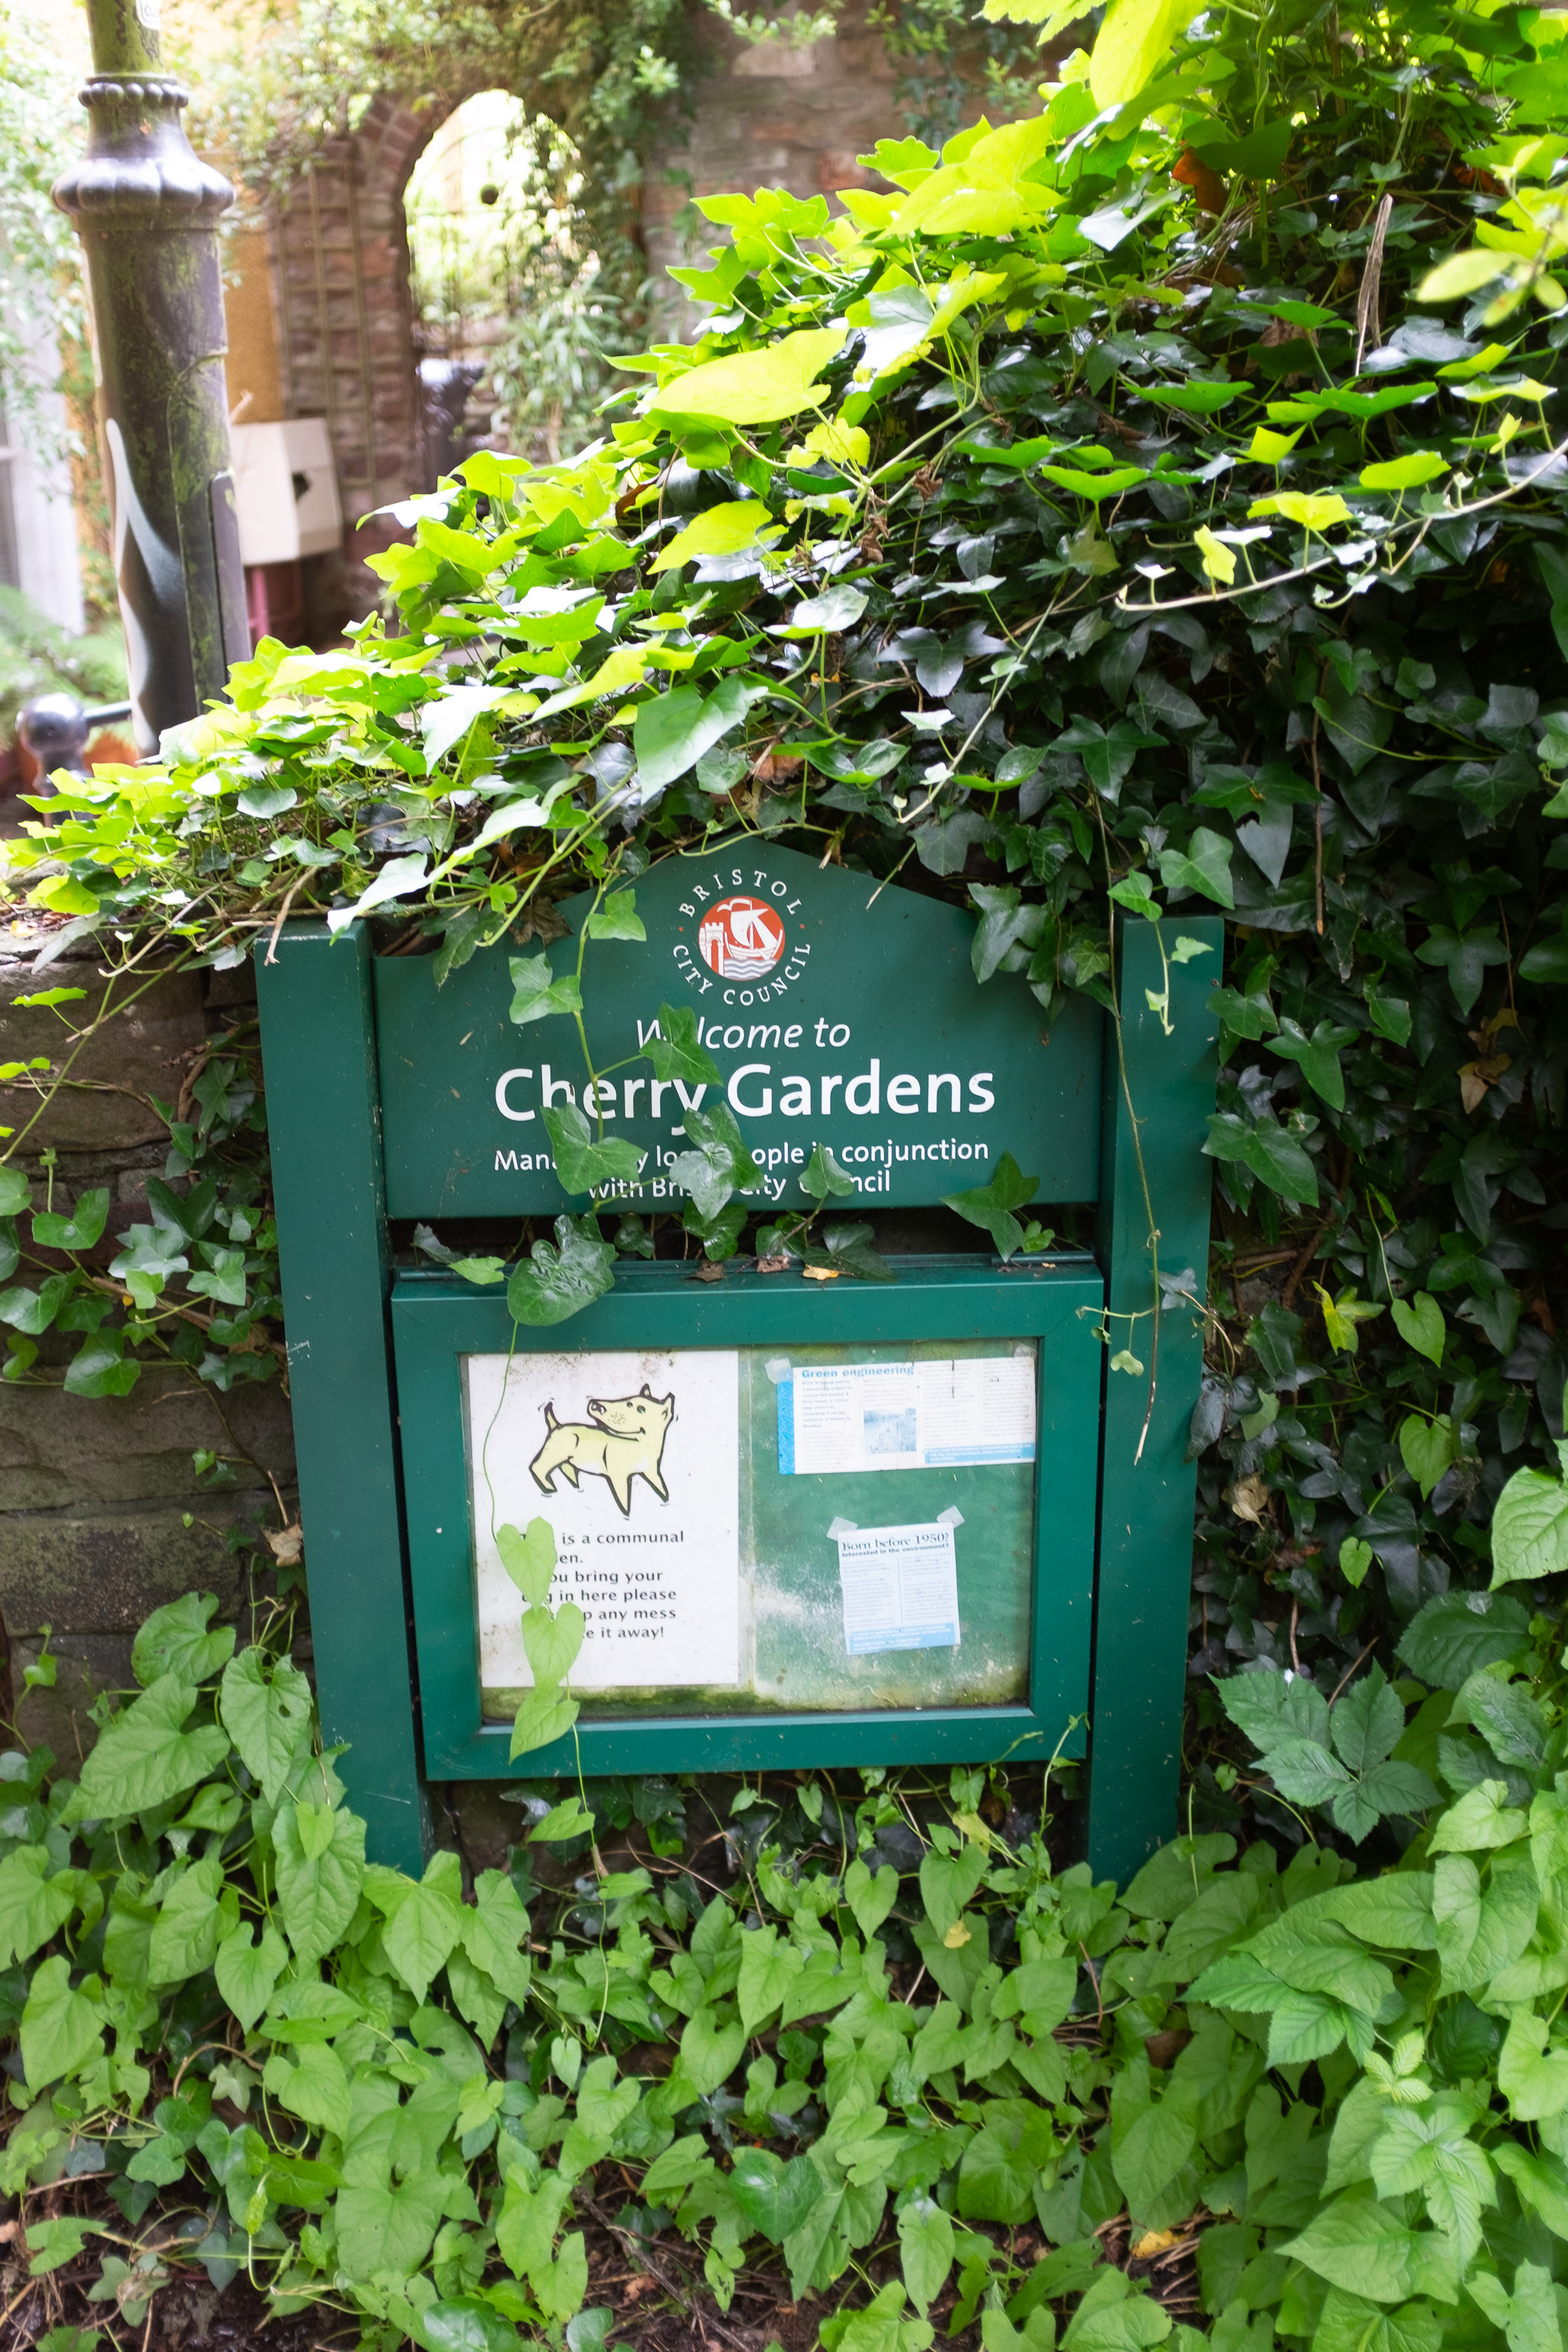 Welcome to Cherry Gardens
"Managed by local people in conjunction with Bristol City Council", confirming its status as a public space, so I'm definitely not trespassing. Good.
